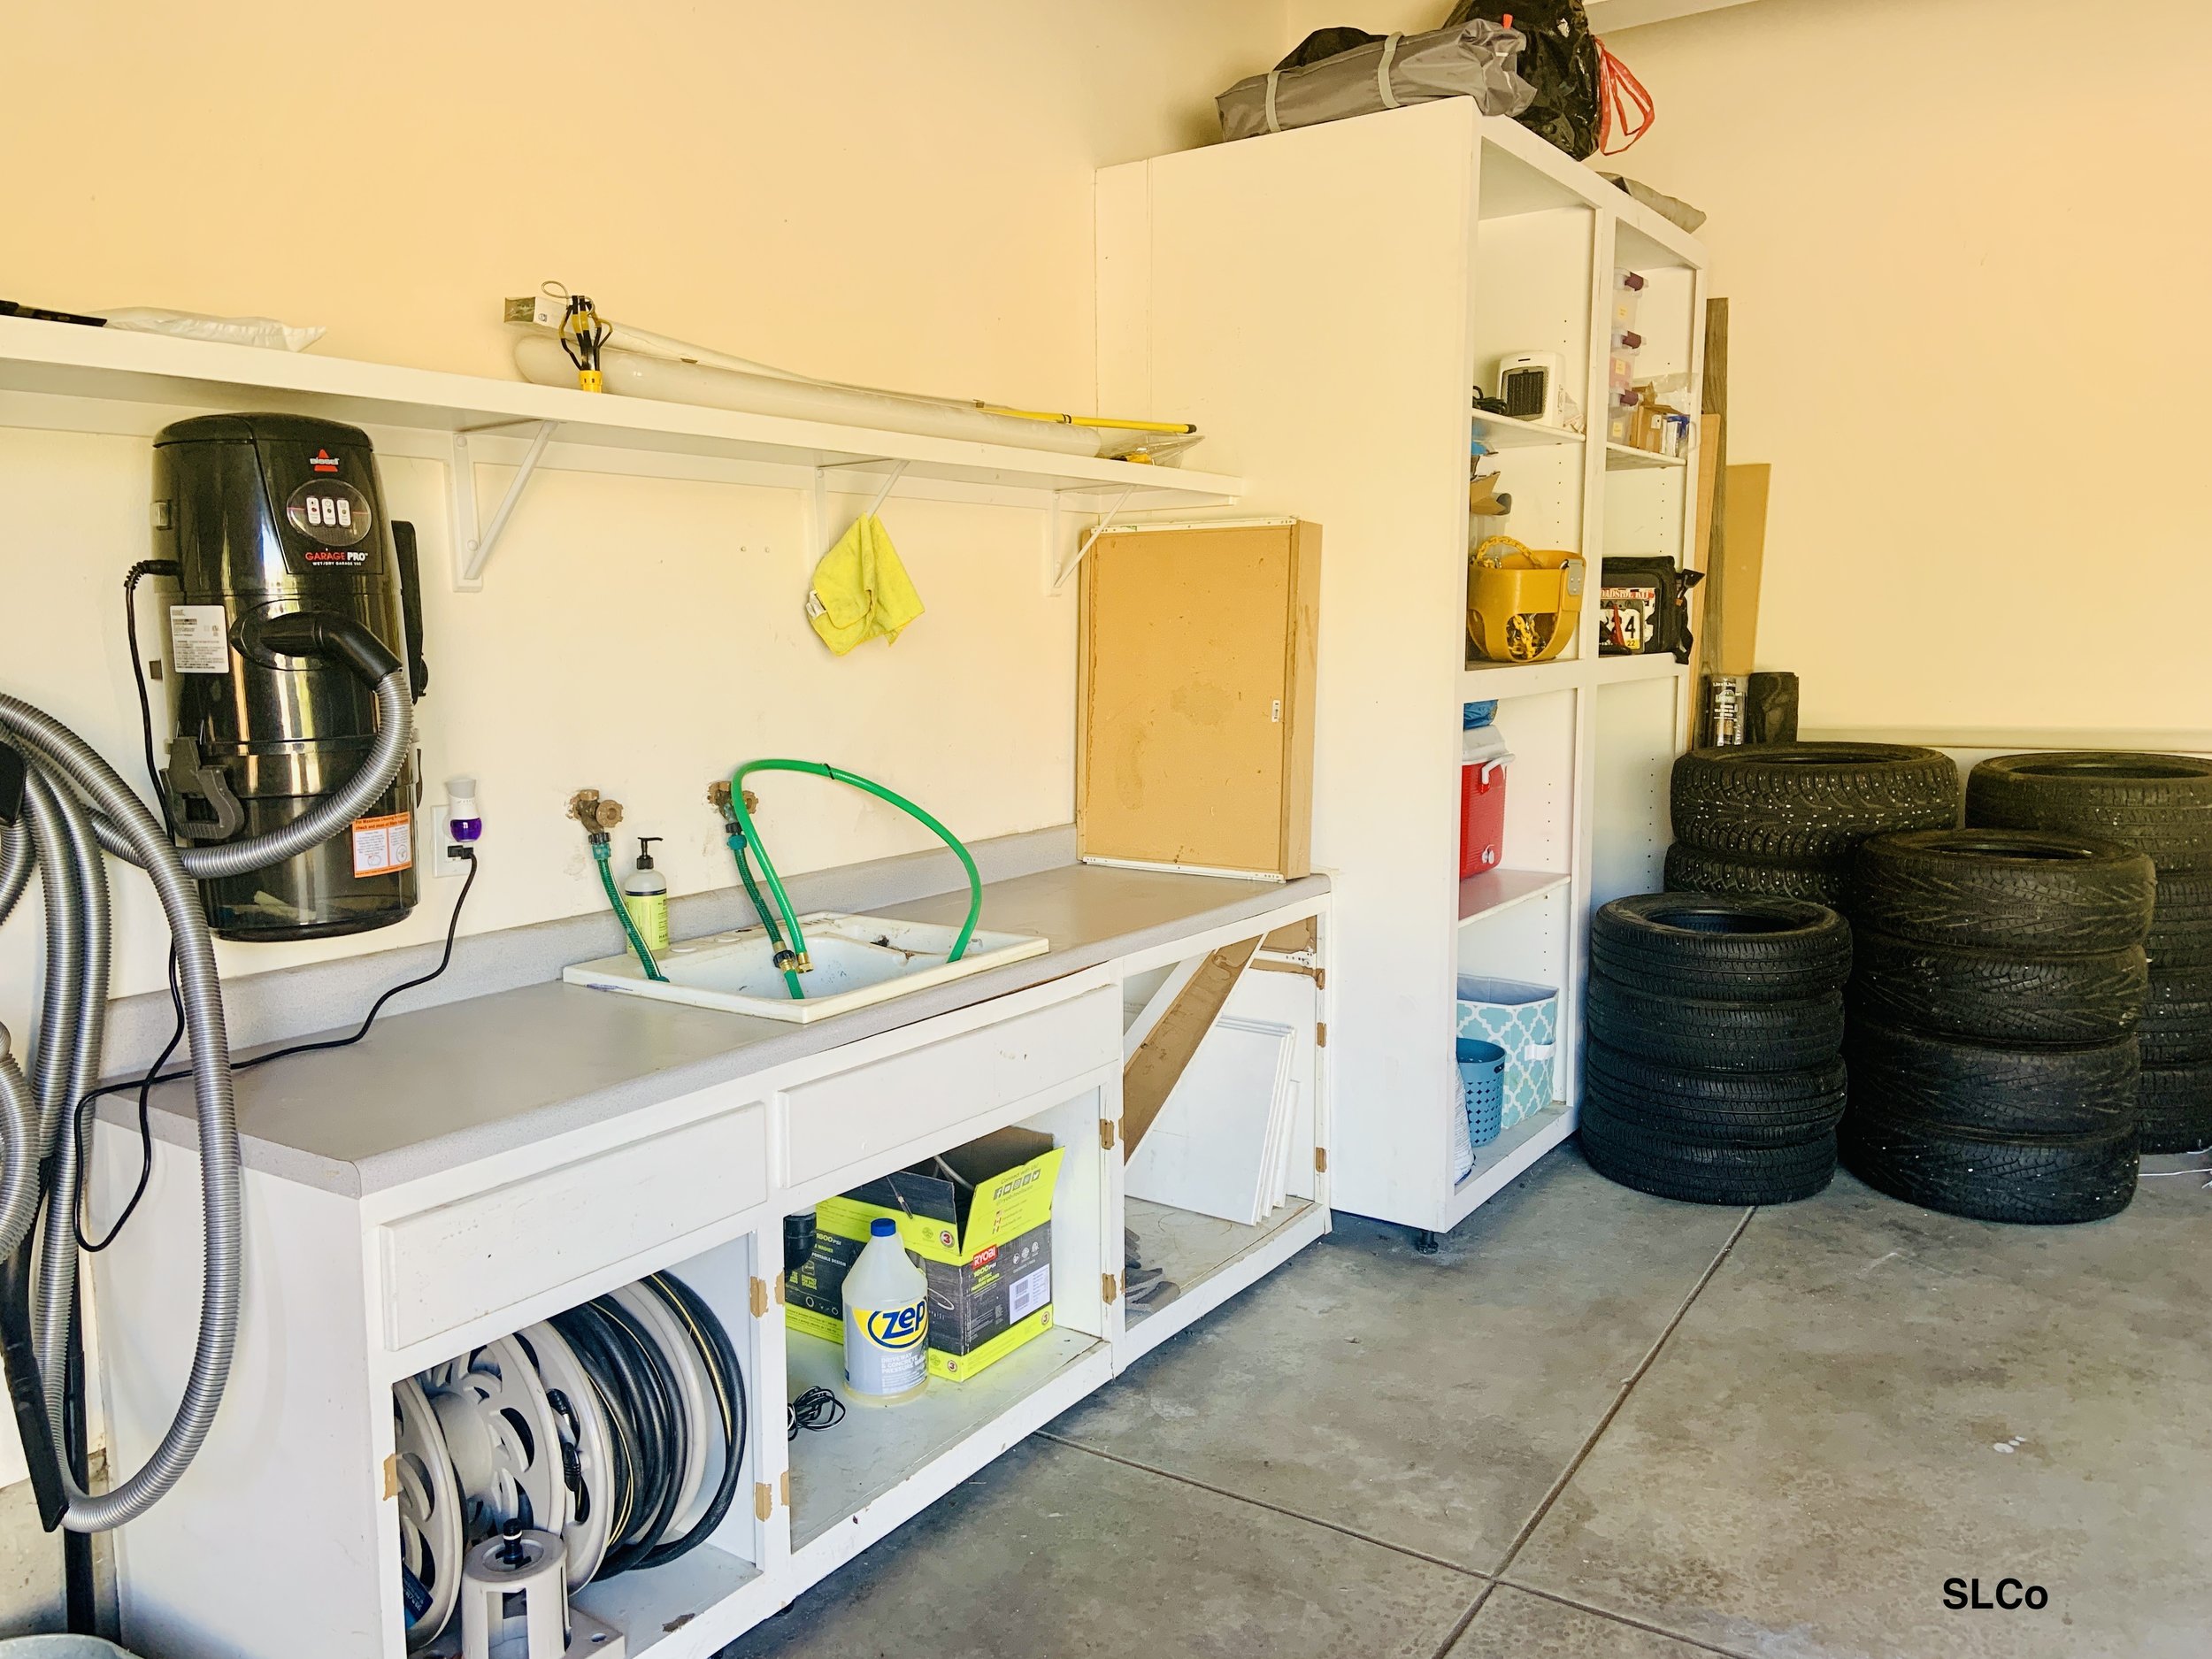 Garage with white built in large shelves and a counter and sink with counter and floor cleared and usable sink